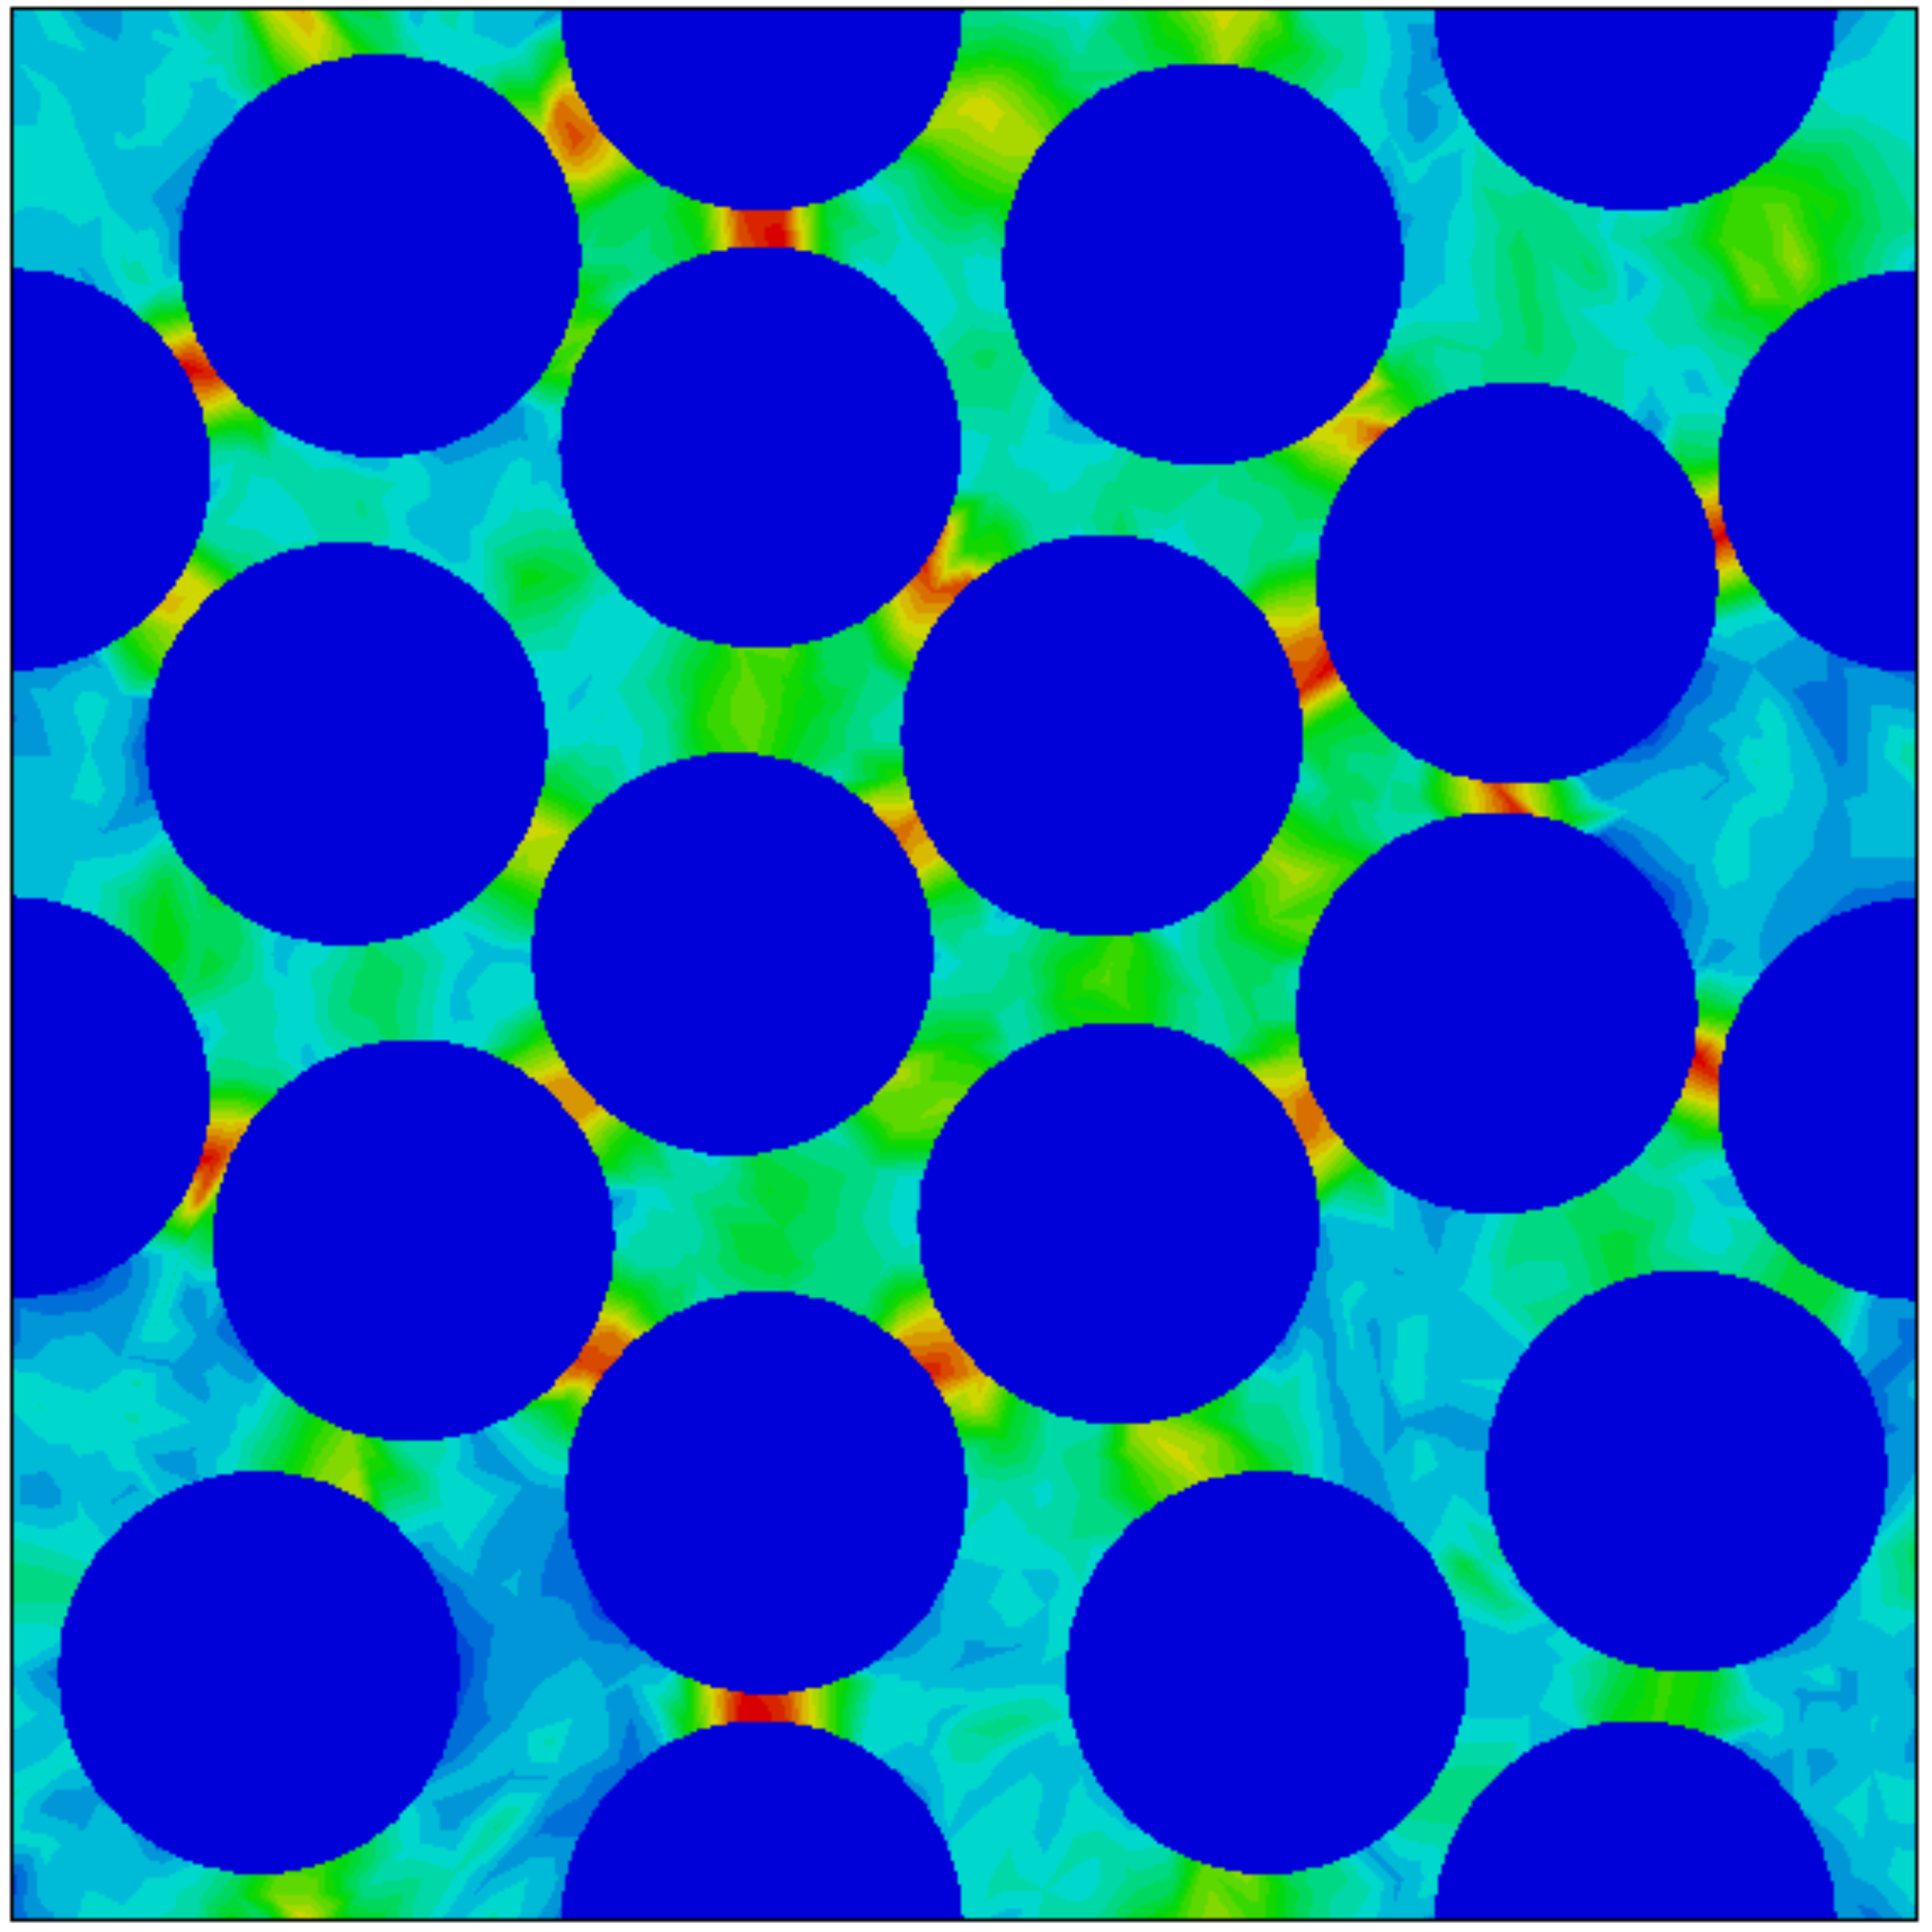 An image of a blue green background with blue circles over it.